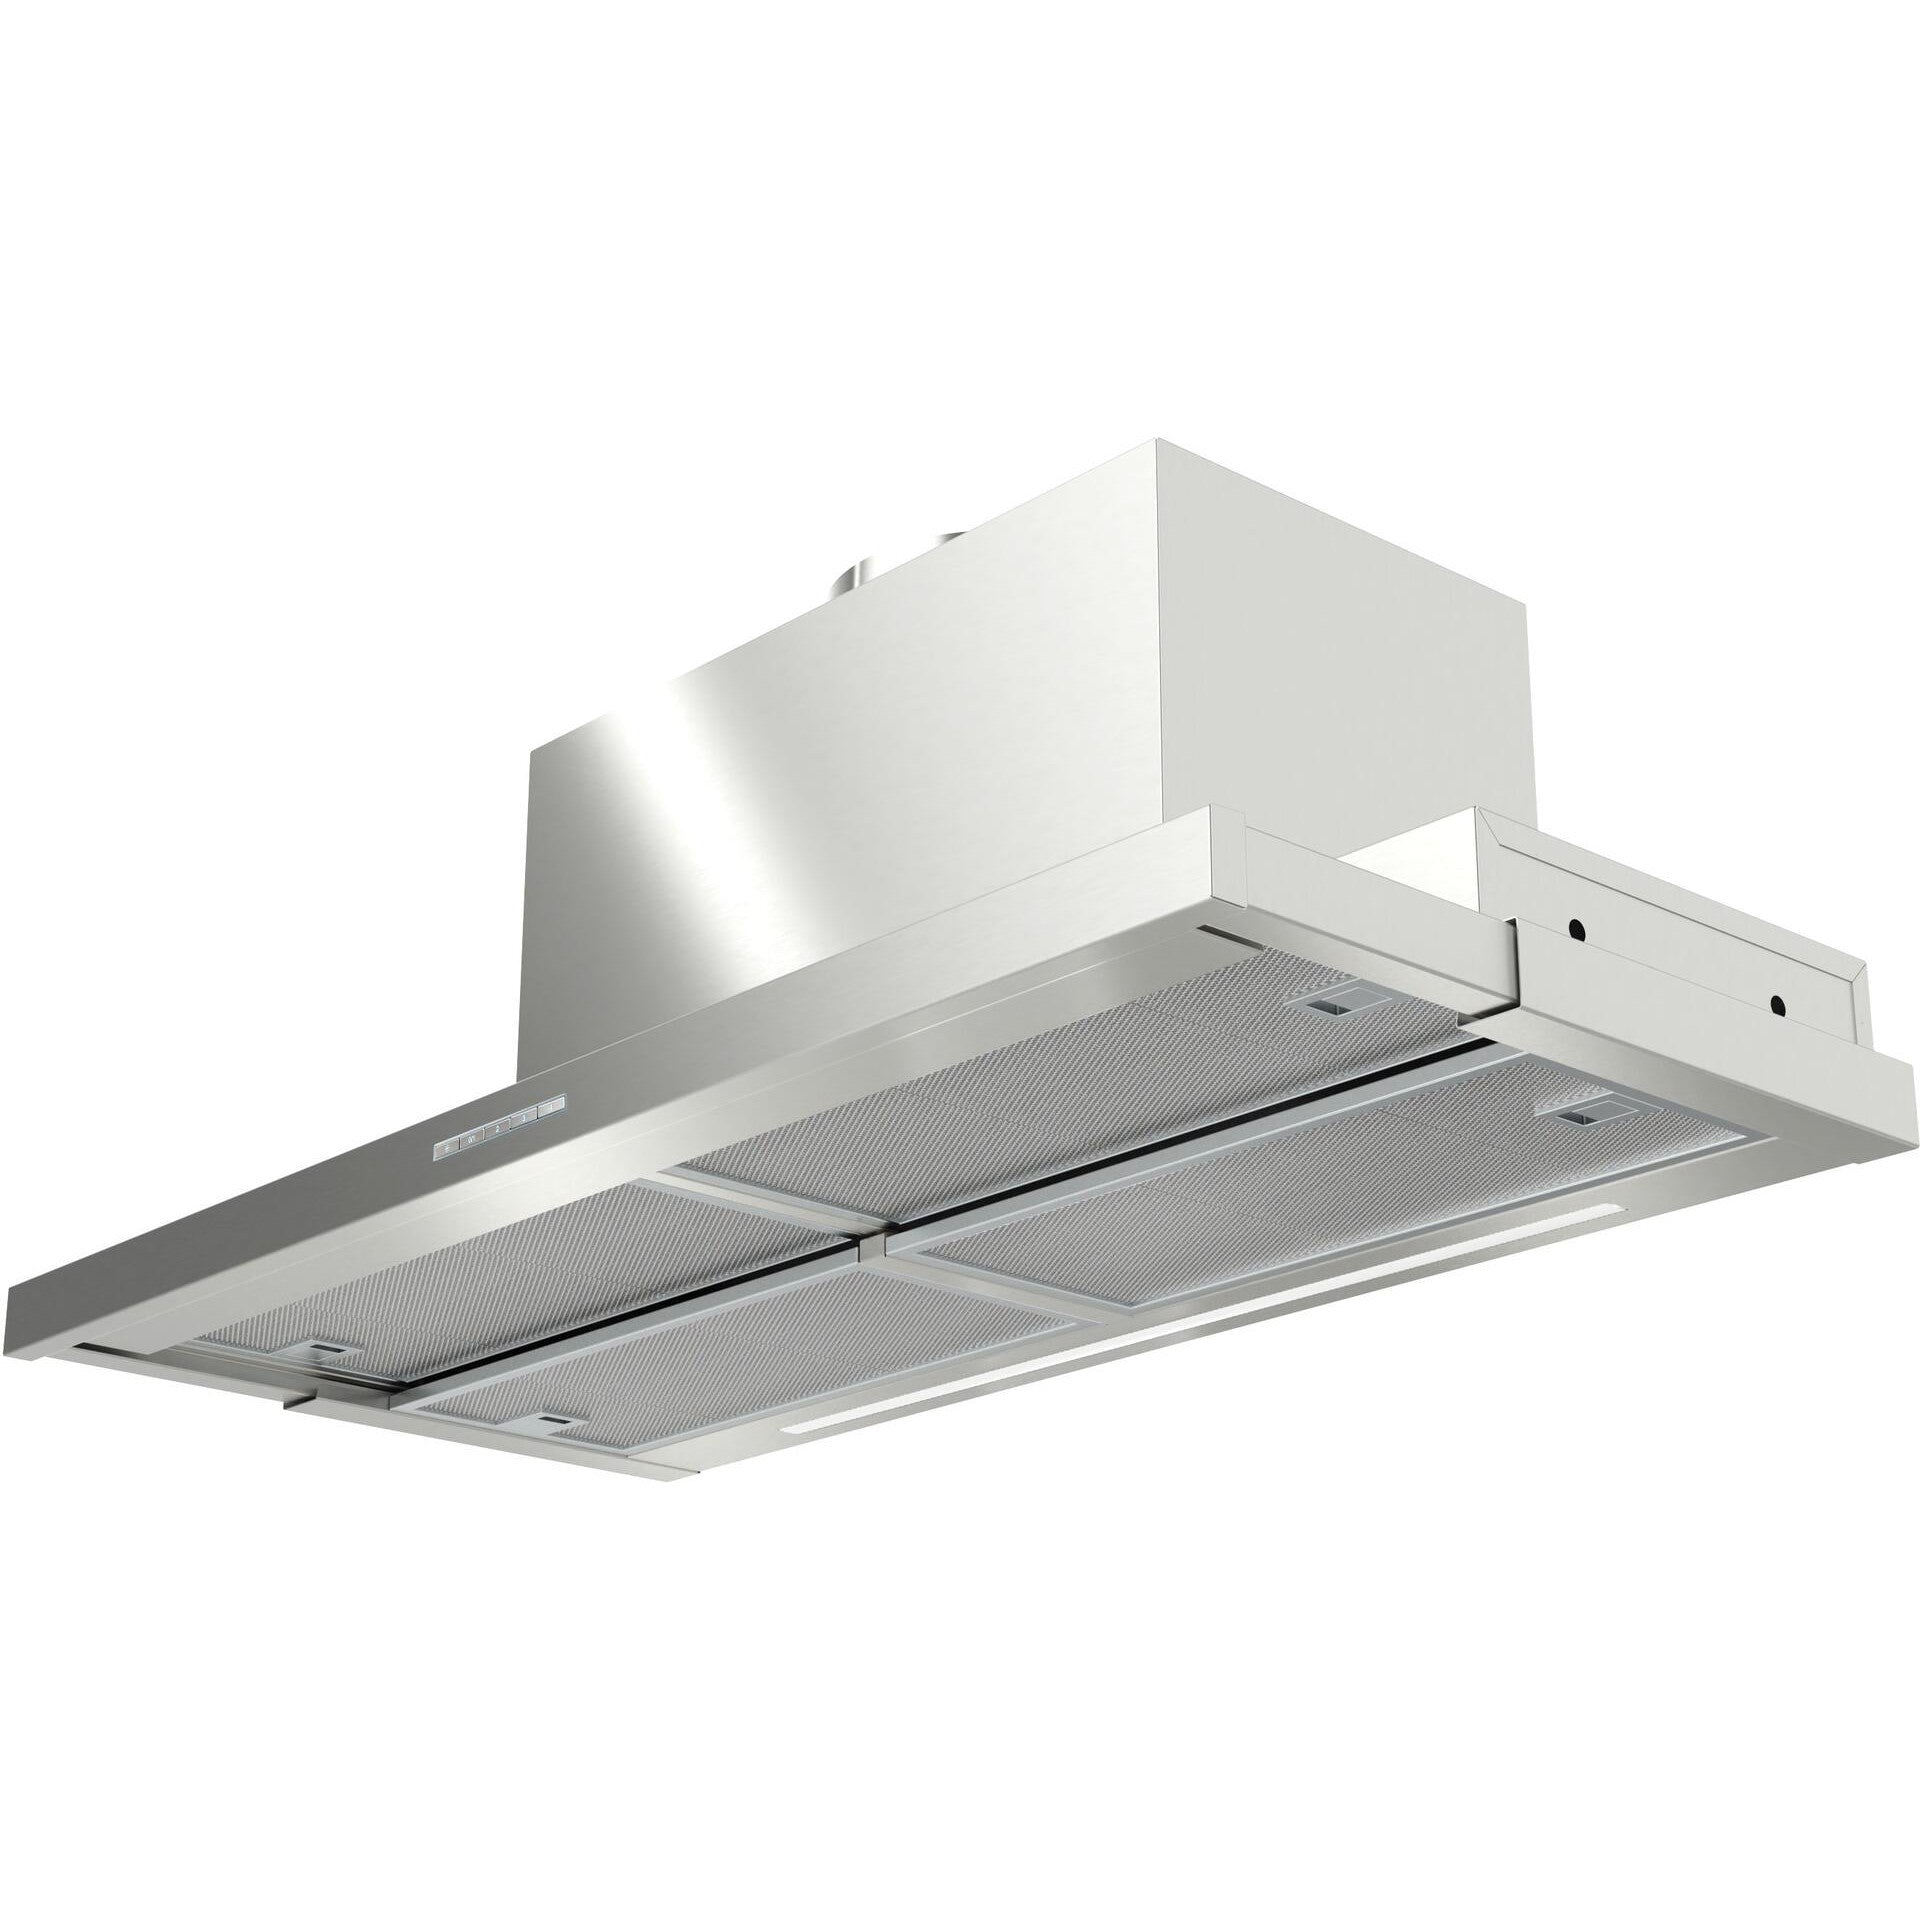 Forte Keira 24" 600 CFM Convertible Residential Round Duct Stainless Steel Slide Out Cabinet Insert Range Hood With LED Bar Lighting